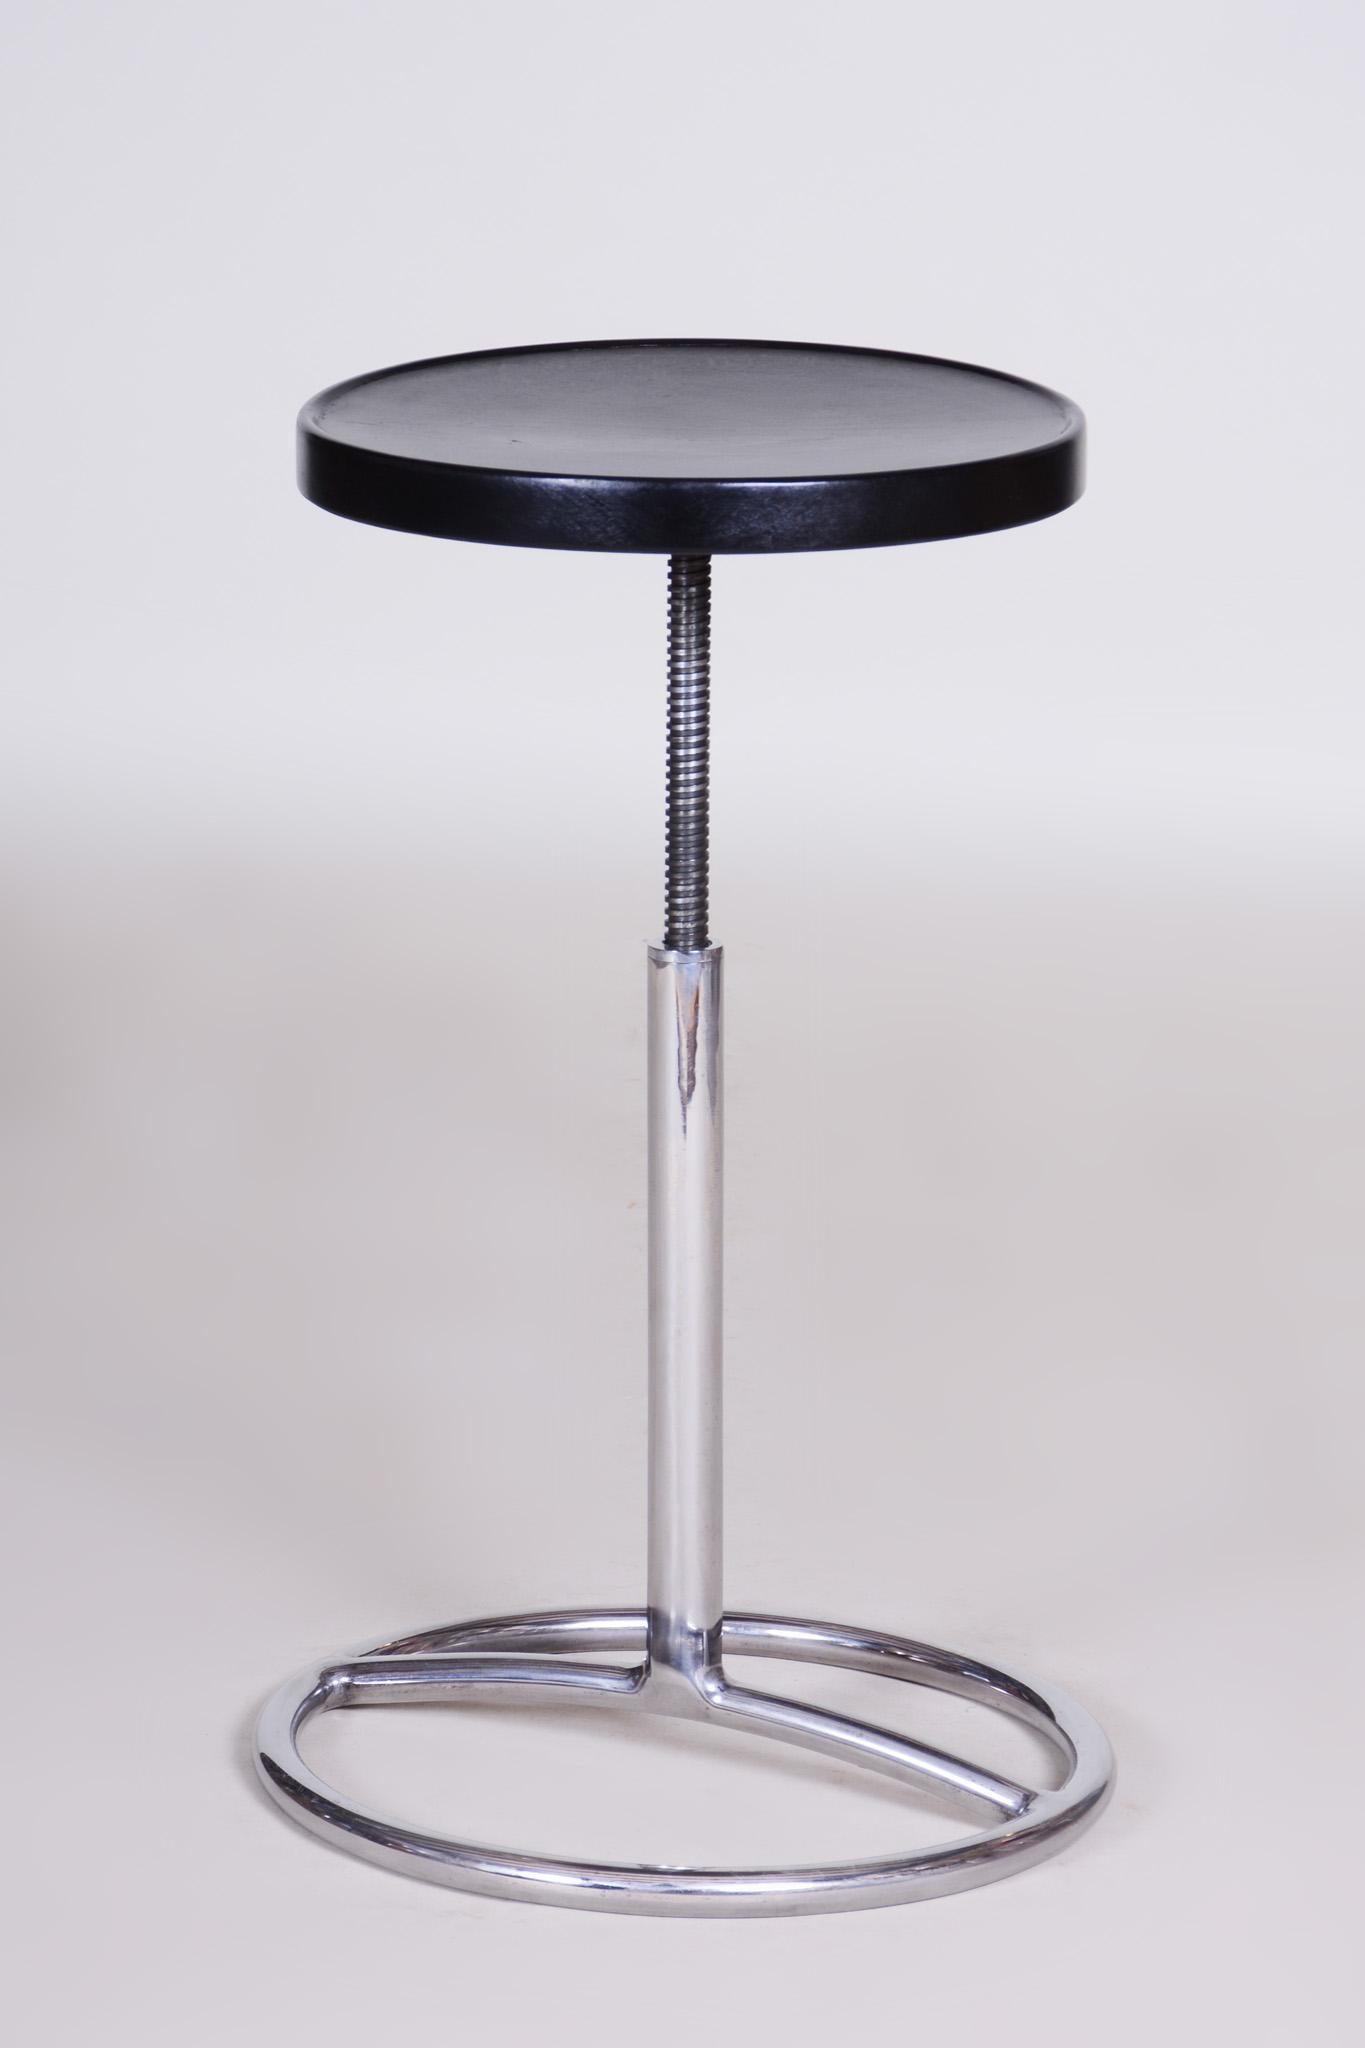 Black Art Deco Round Piano Stool, Fully Restored, 1930s In Good Condition For Sale In Horomerice, CZ